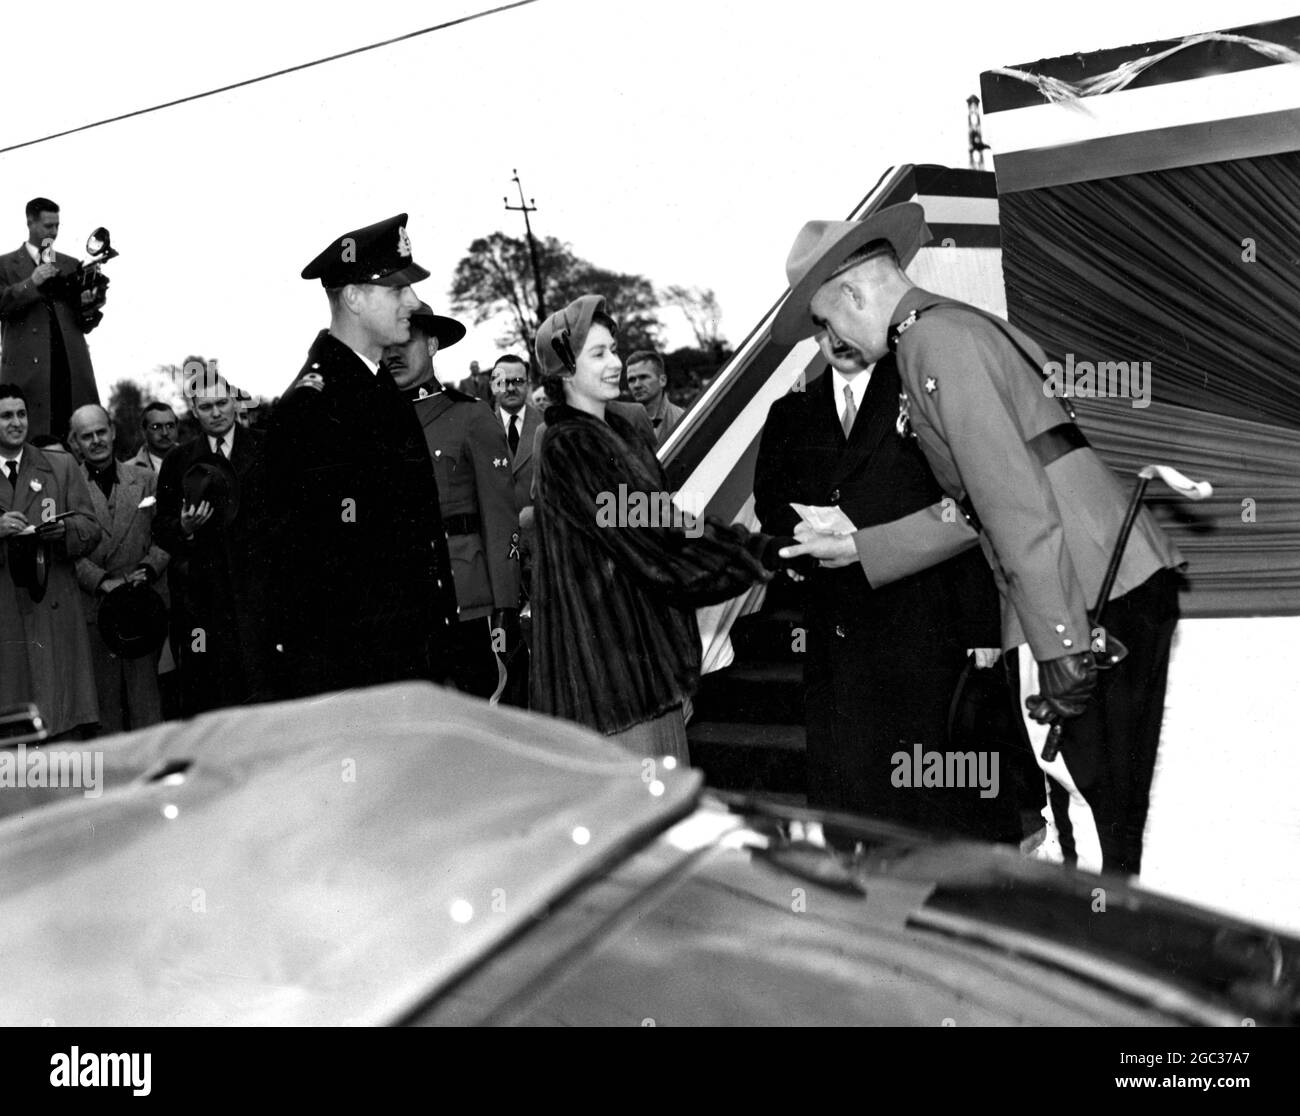 Princess Elizabeth and the Duke of Edinburgh pause to shake hands with an R.C.M.P Officer as they board the train which took them from Dorval Airport to Quebec City. Montreal, Canada - 1951. Stock Photo